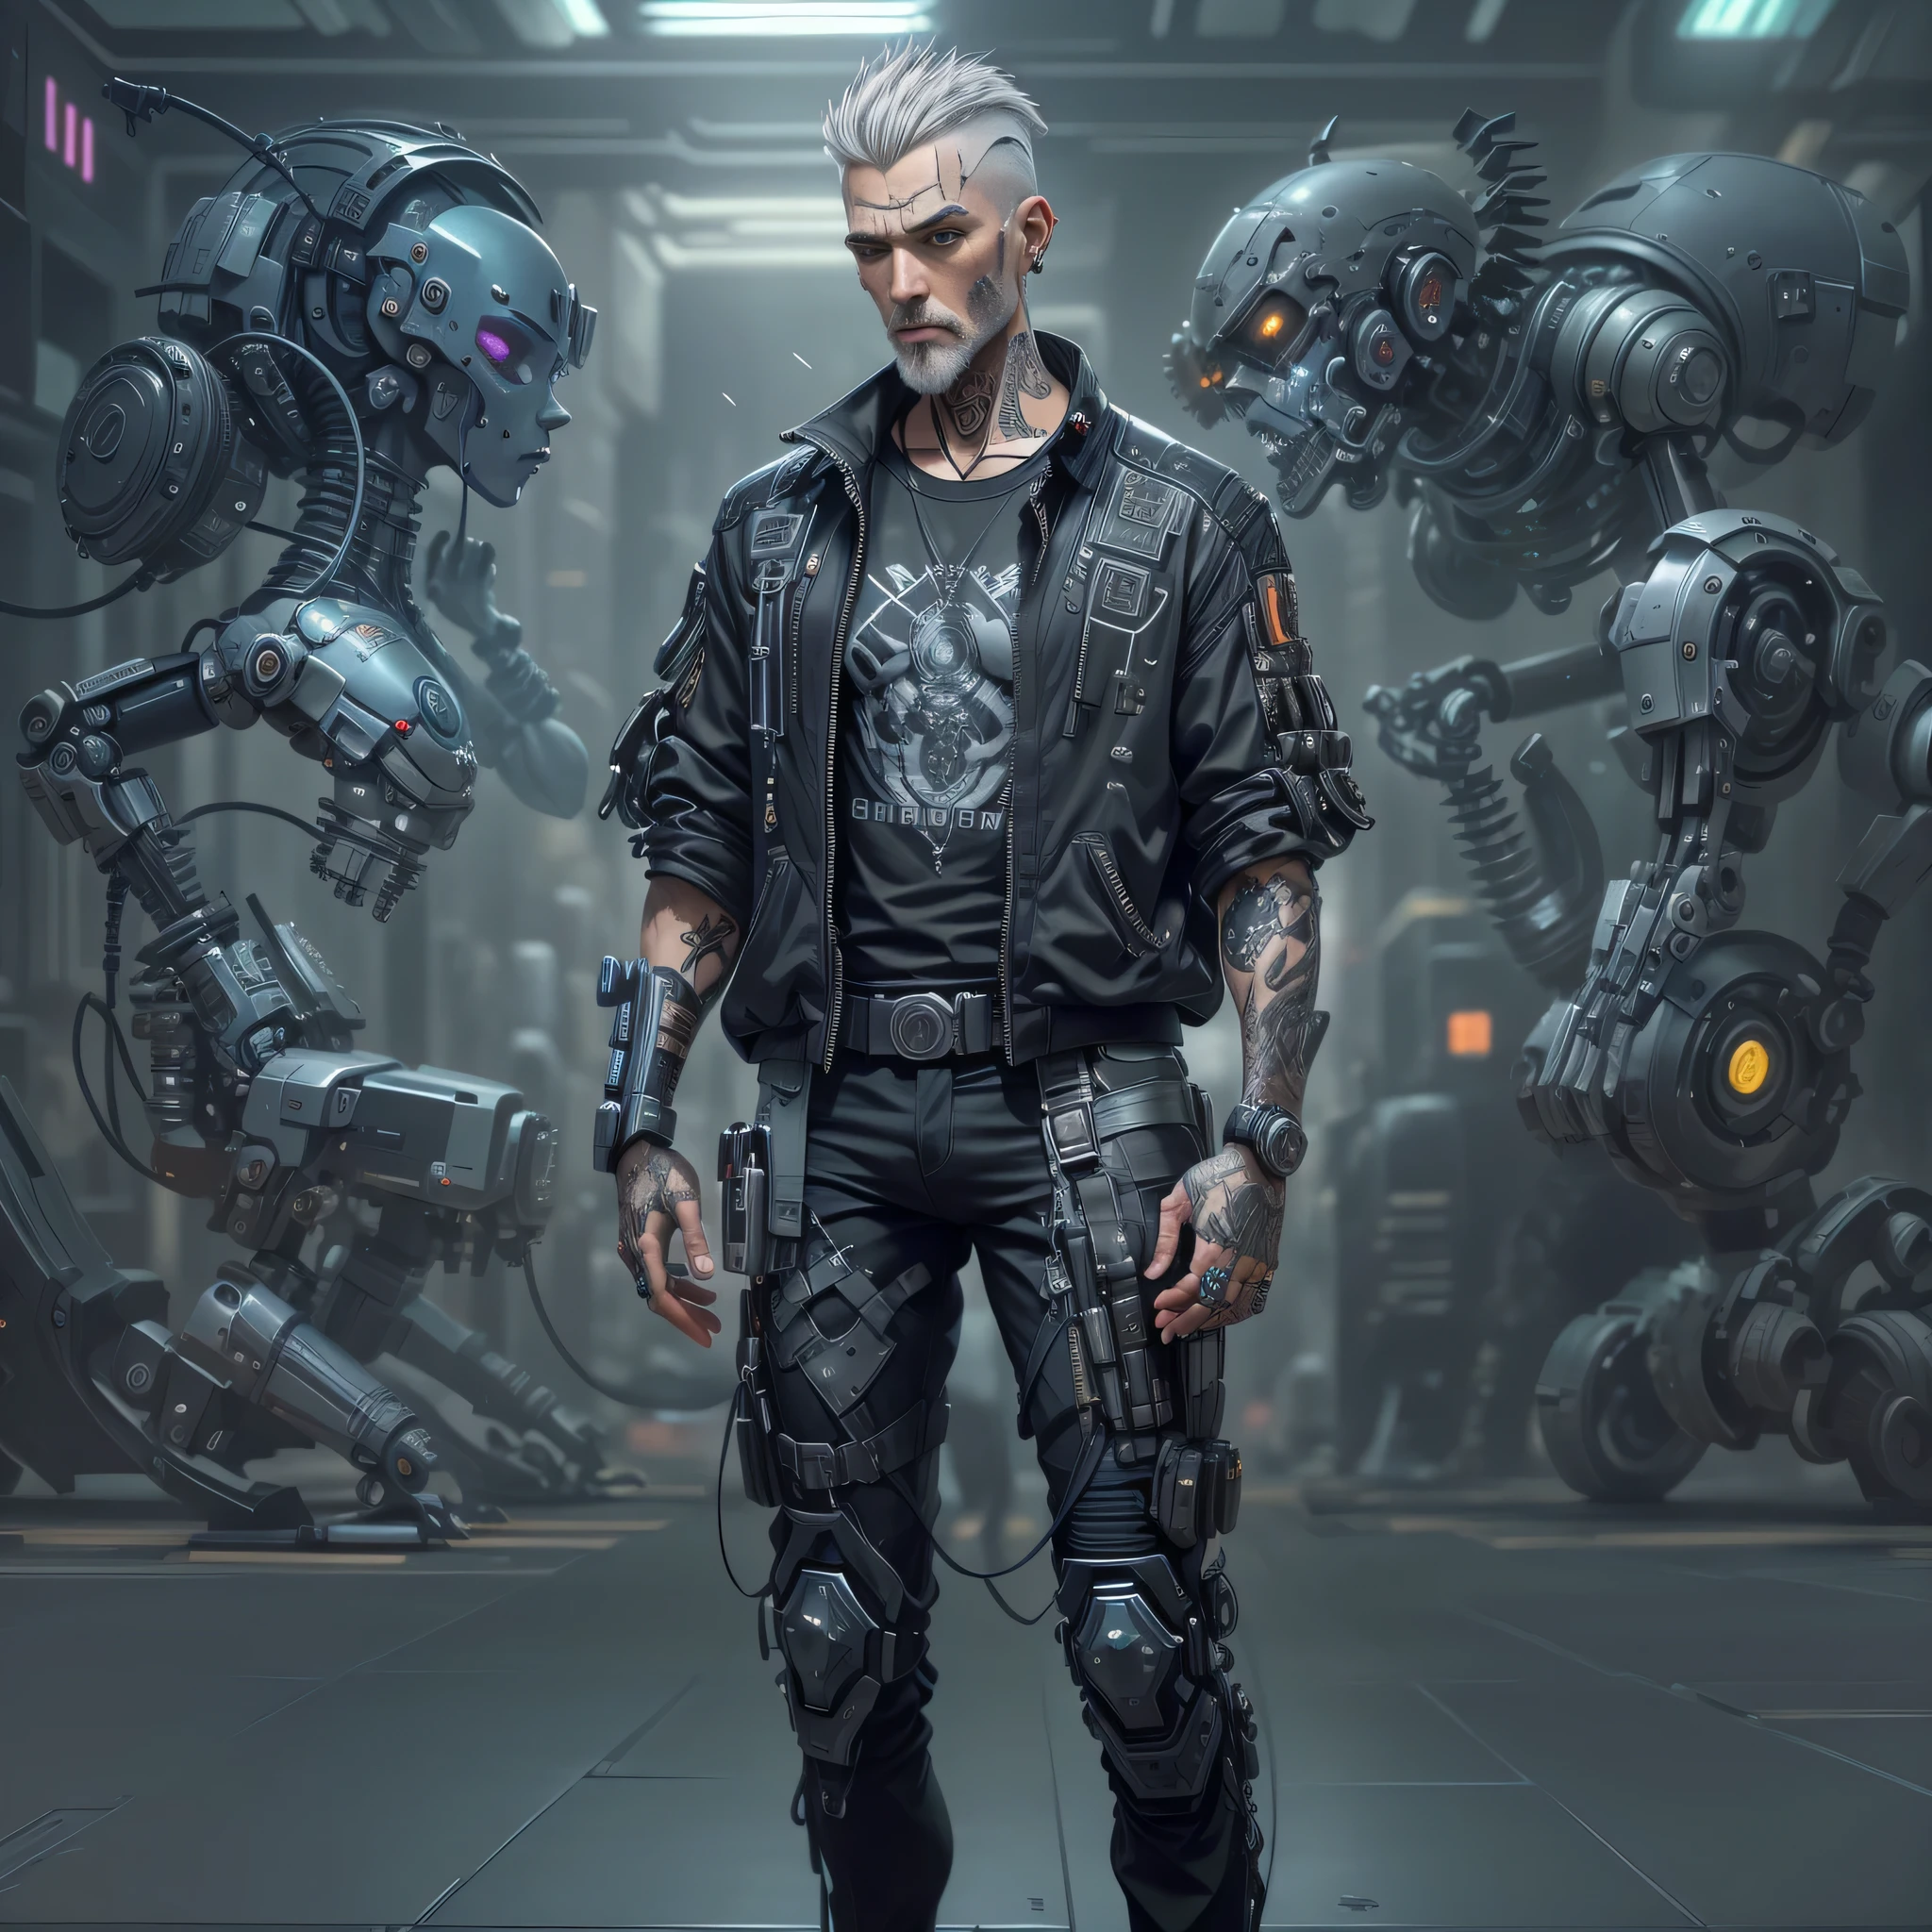 thin man, serious face, male,gray hair, barba curta, with cybernetic arm, robotic arm, with robotic prosthesis,implants on face,wearing comfortable clothes, jeans cinza, camisa regata cinza, t-shirt, shirt, tattoo on upper arm,with all hair shaved, very short hair, full body, cyberpunk, dark cyberpunk, futuristic.